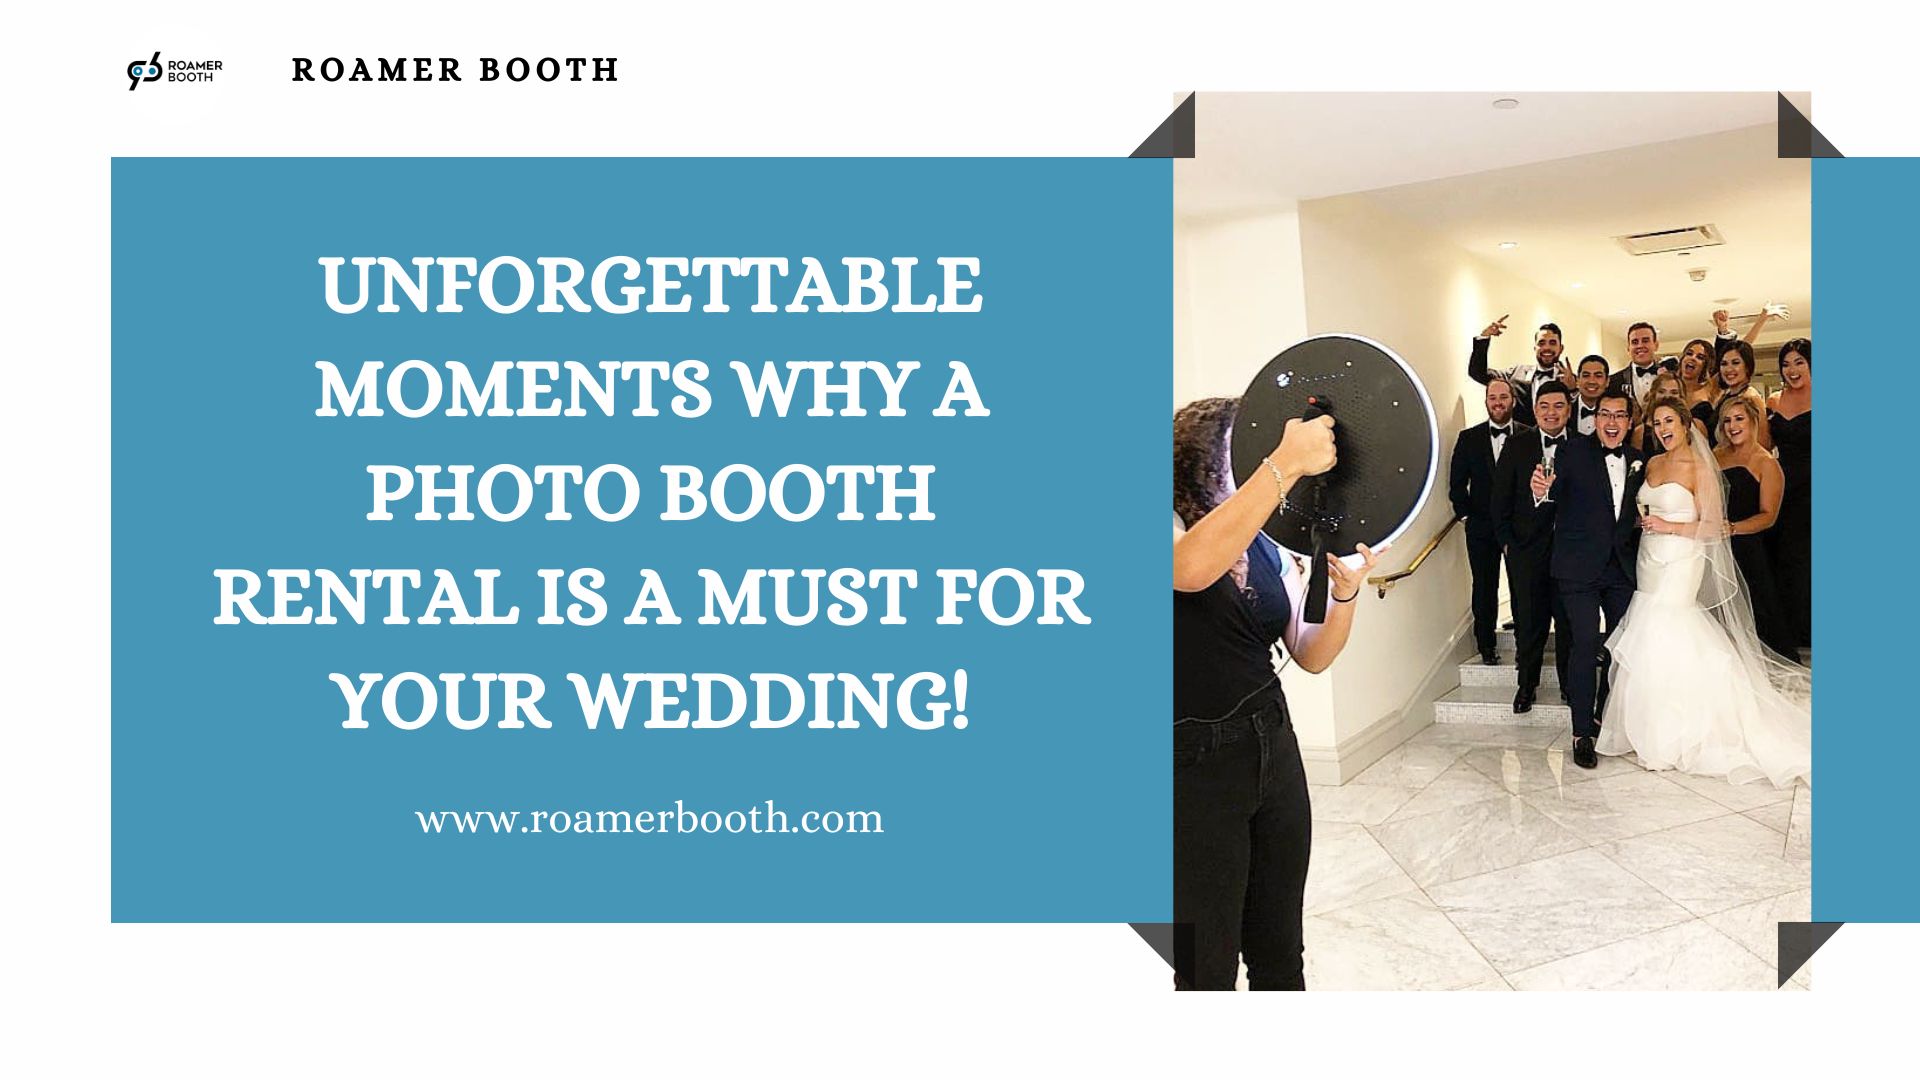 Why a Photo Booth Rental is a Must for Your Wedding!